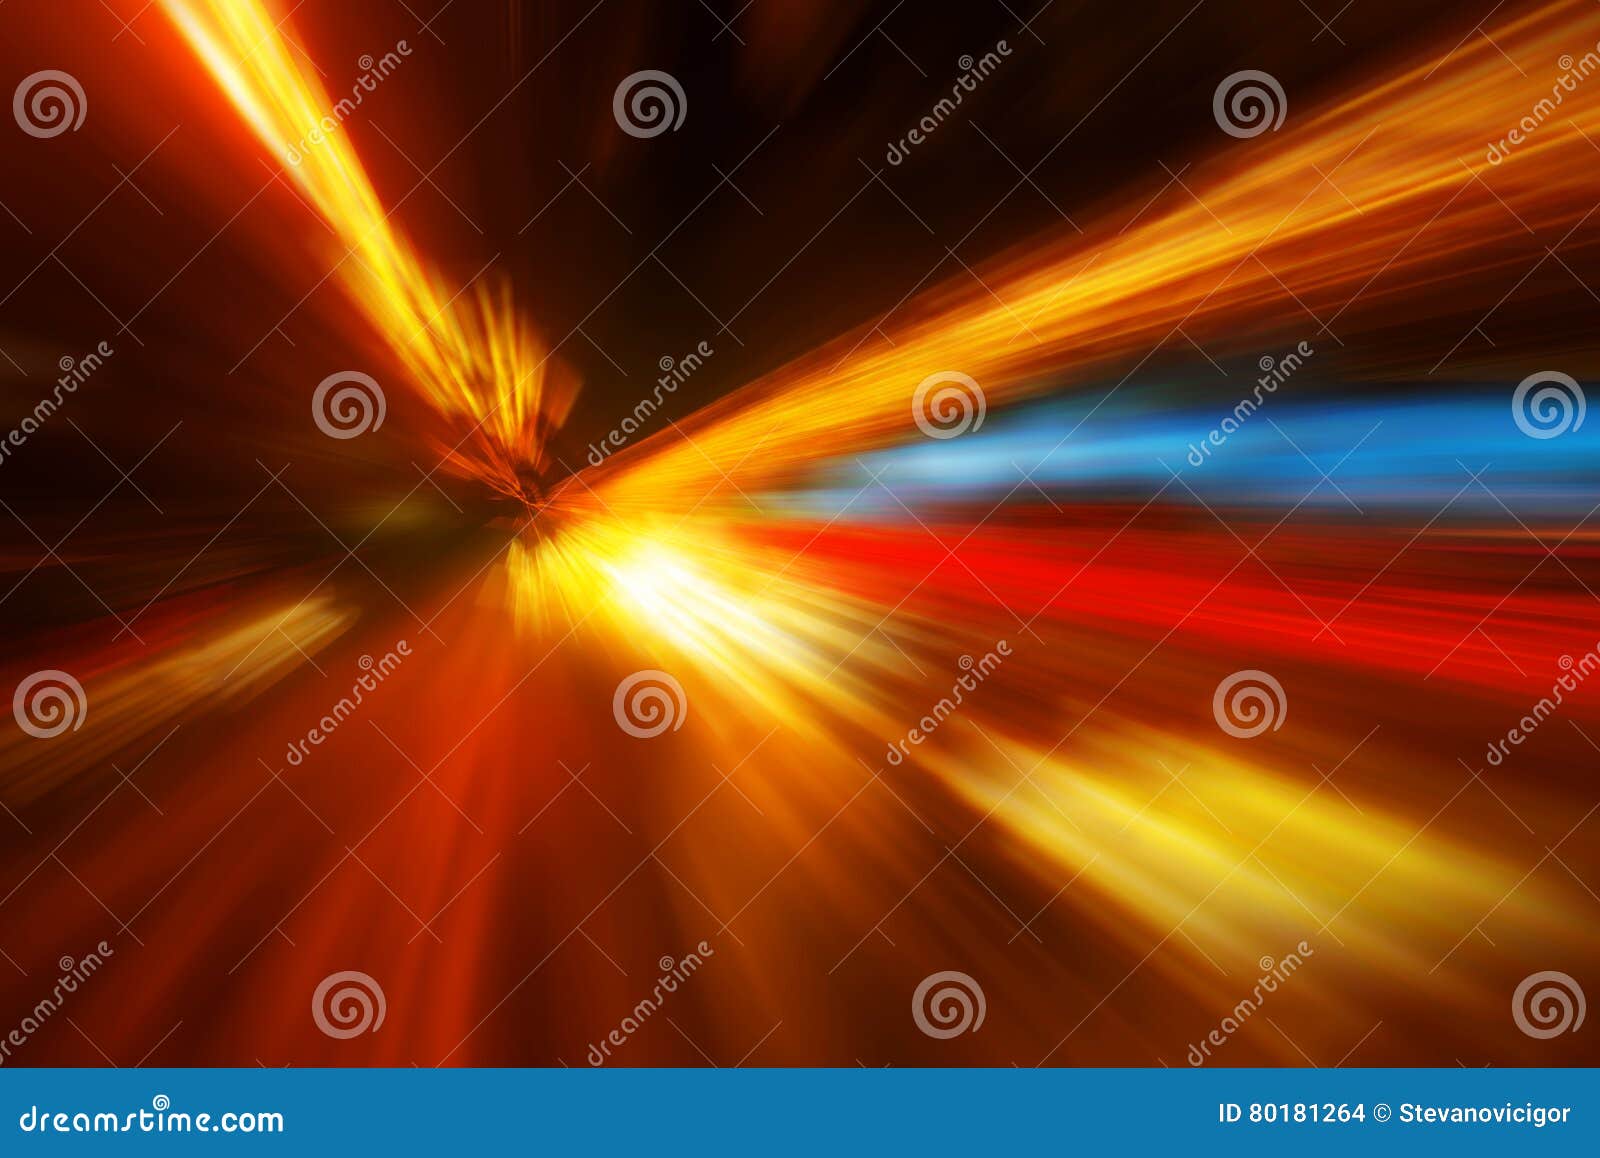 zoom effect colorful abstract blur background